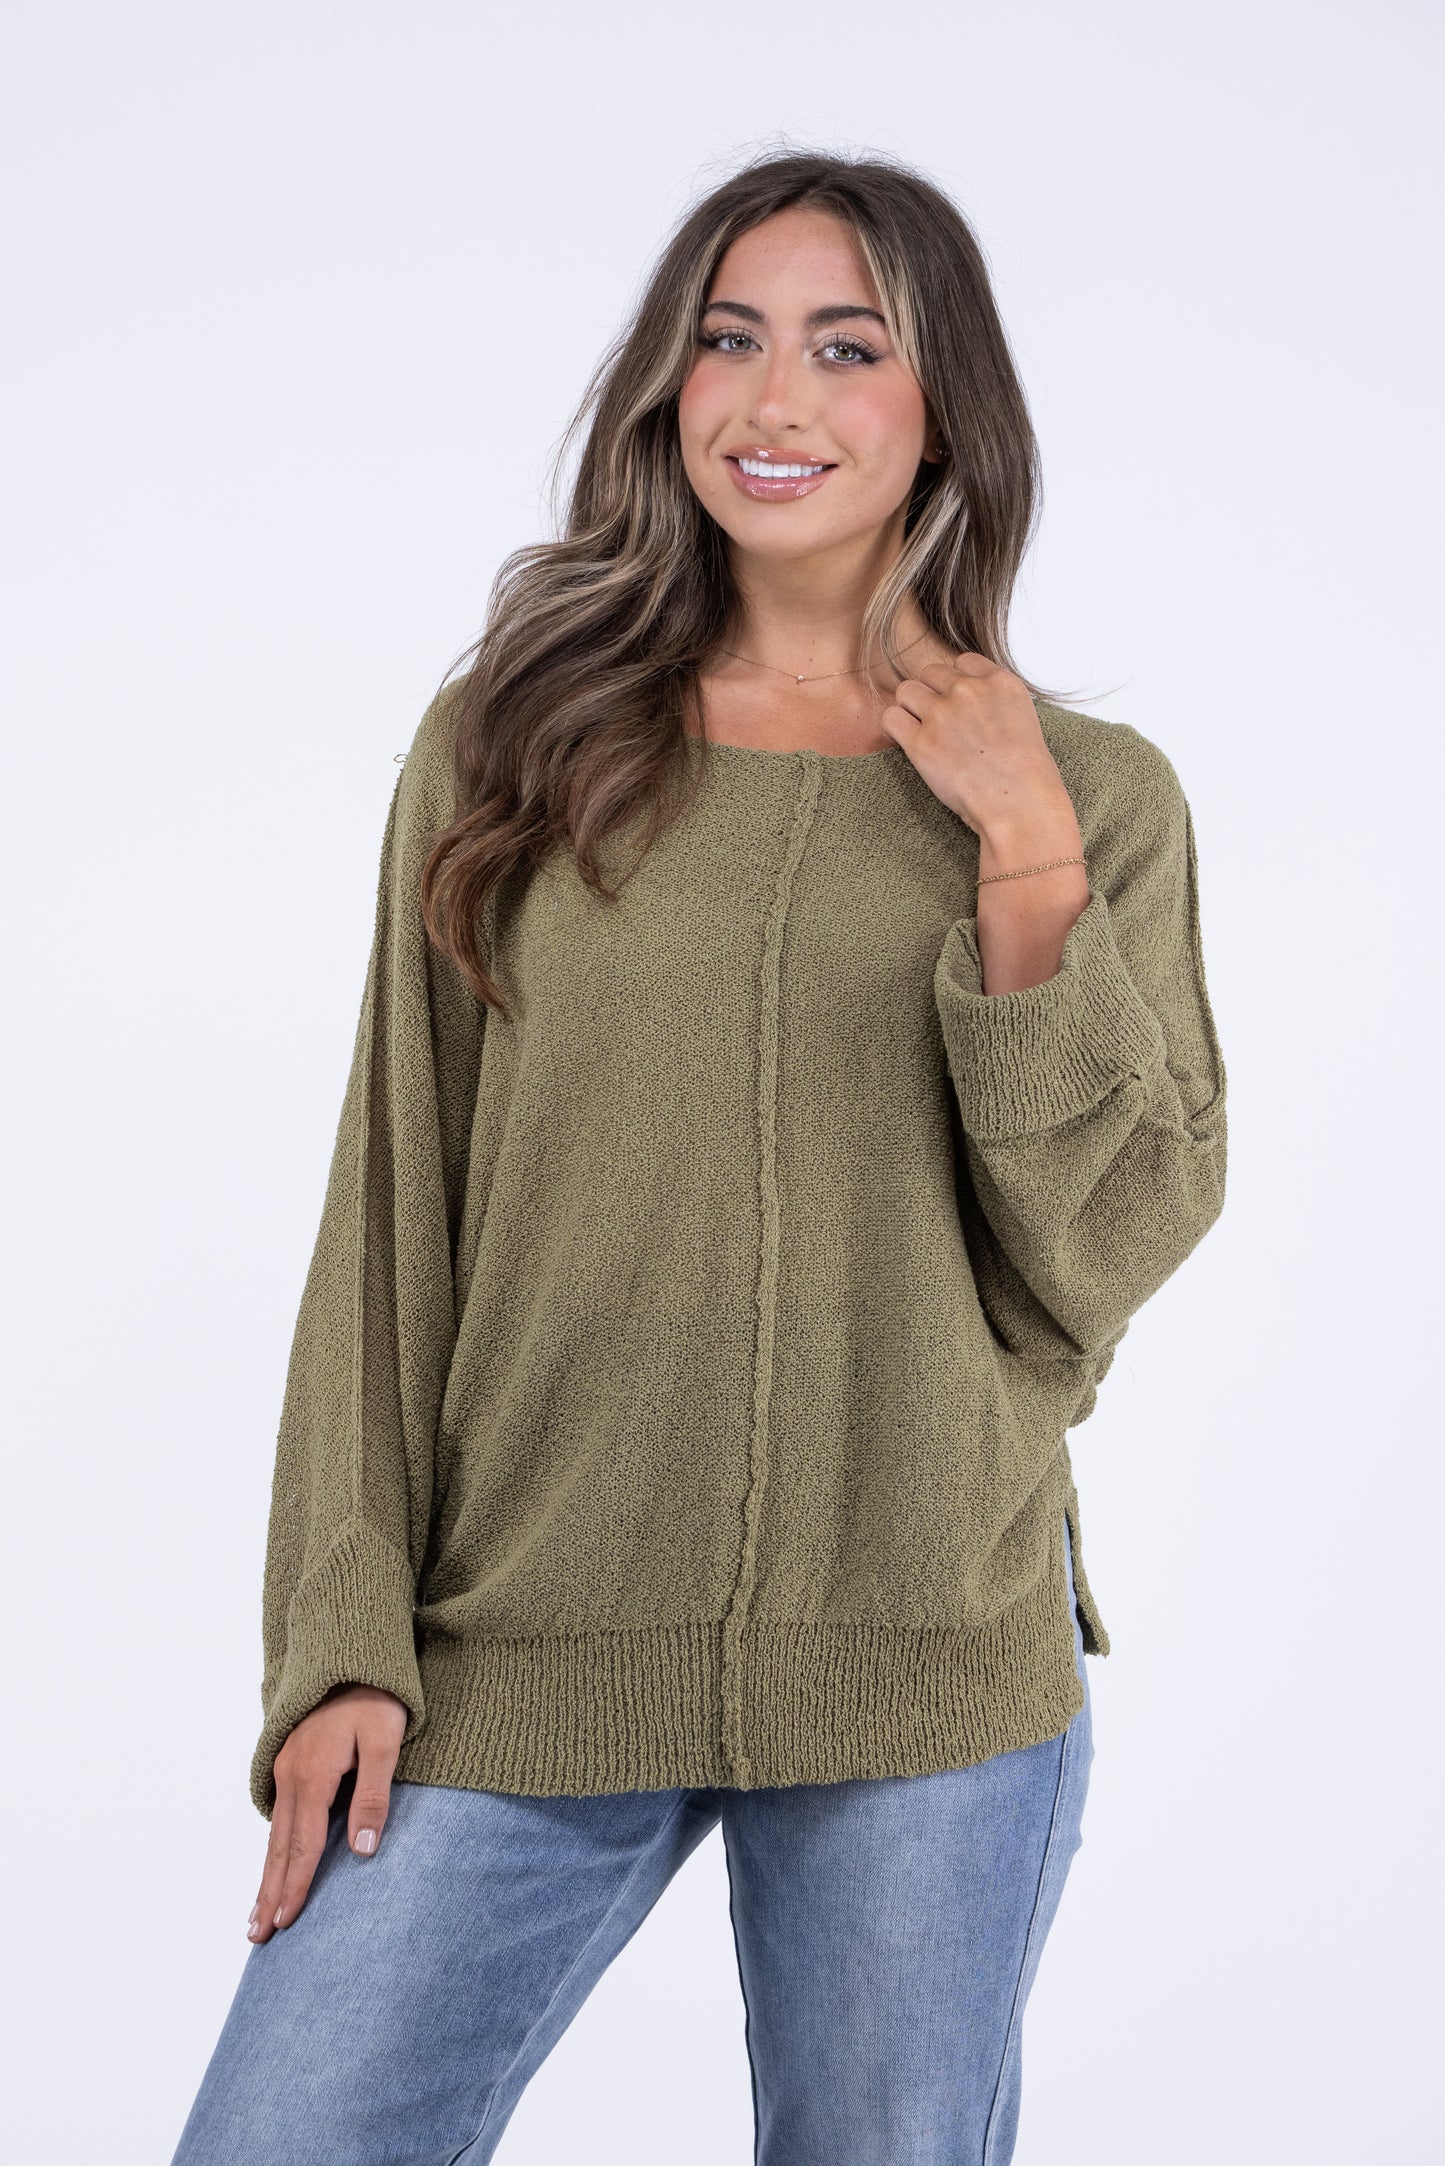 Simple Perfections Sweater